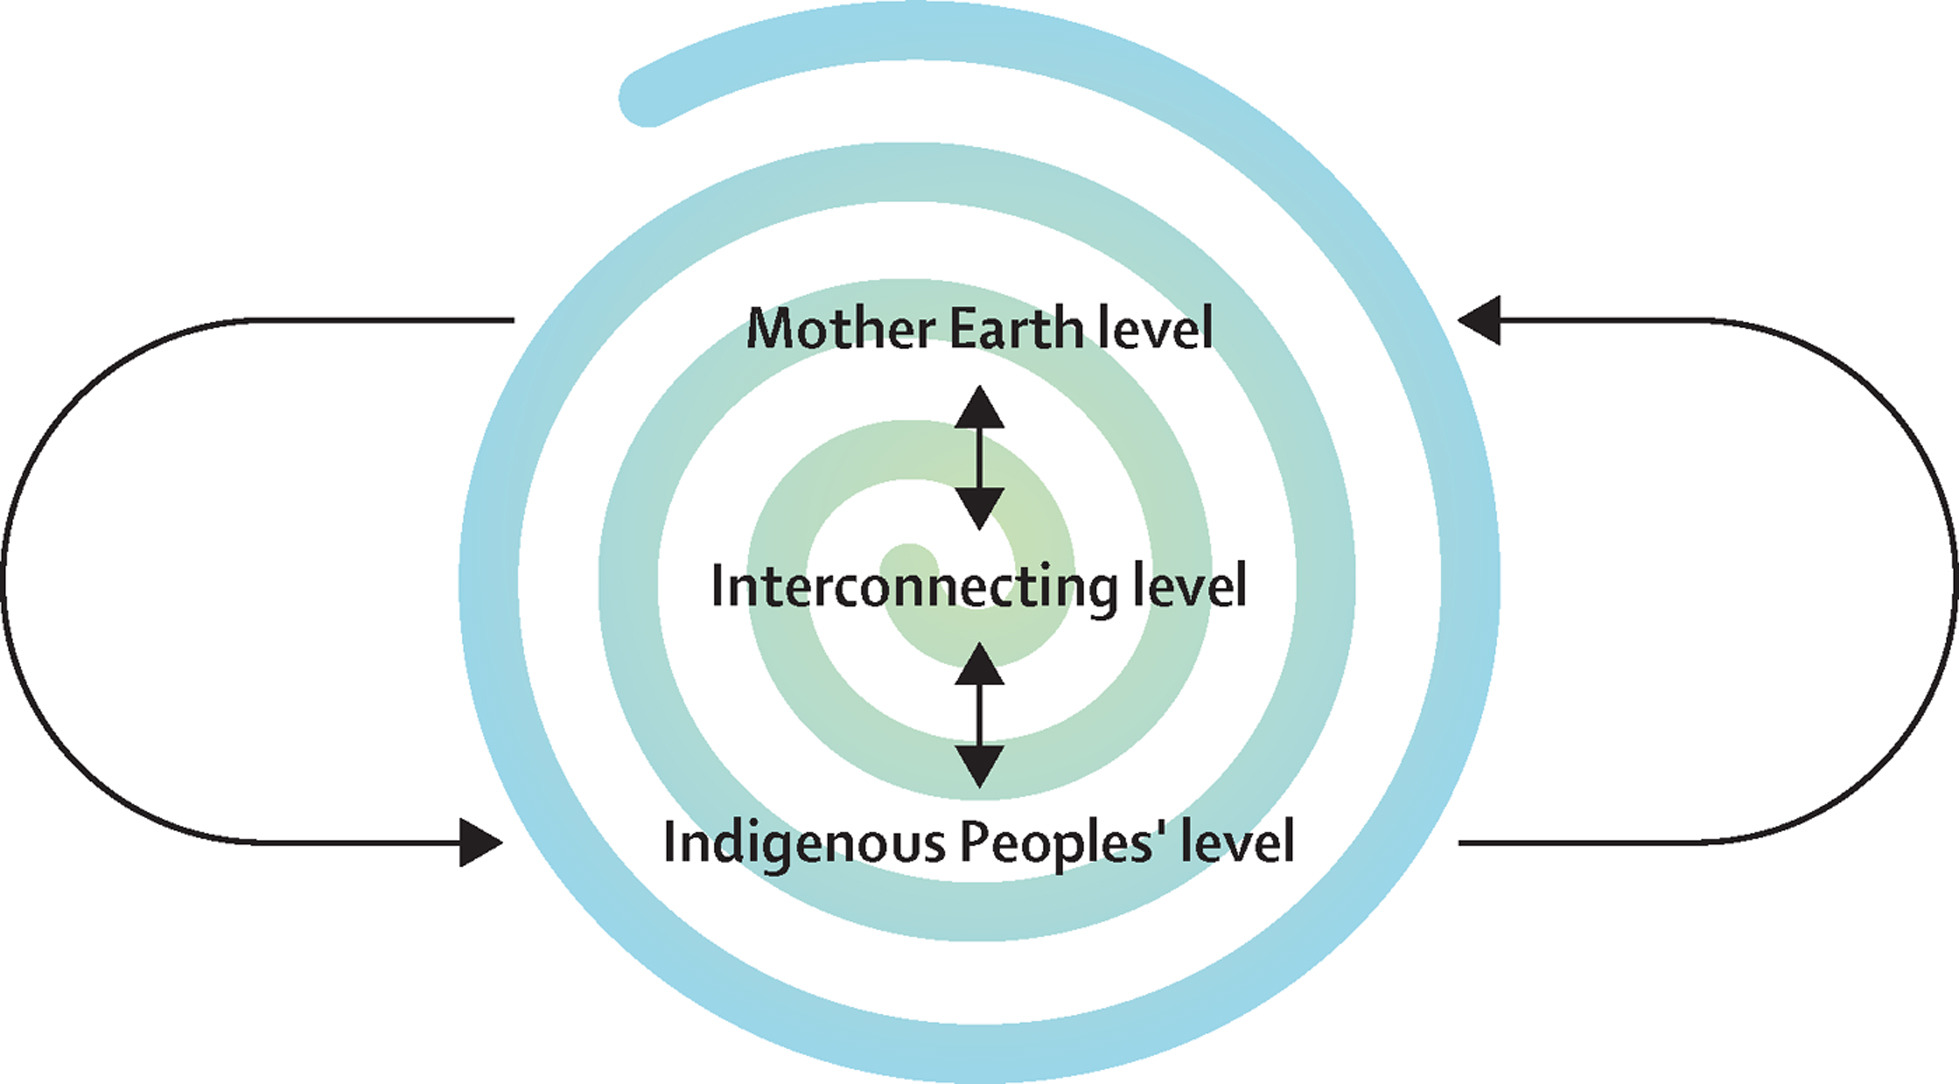 Illustration of the interconnected determinants on a spiral with arrows that show how the Mother Earth-level determinants, Interconnecting determinants, and Indigenous Peoples’ level determinants all work in a reciprocal fashion with each other.